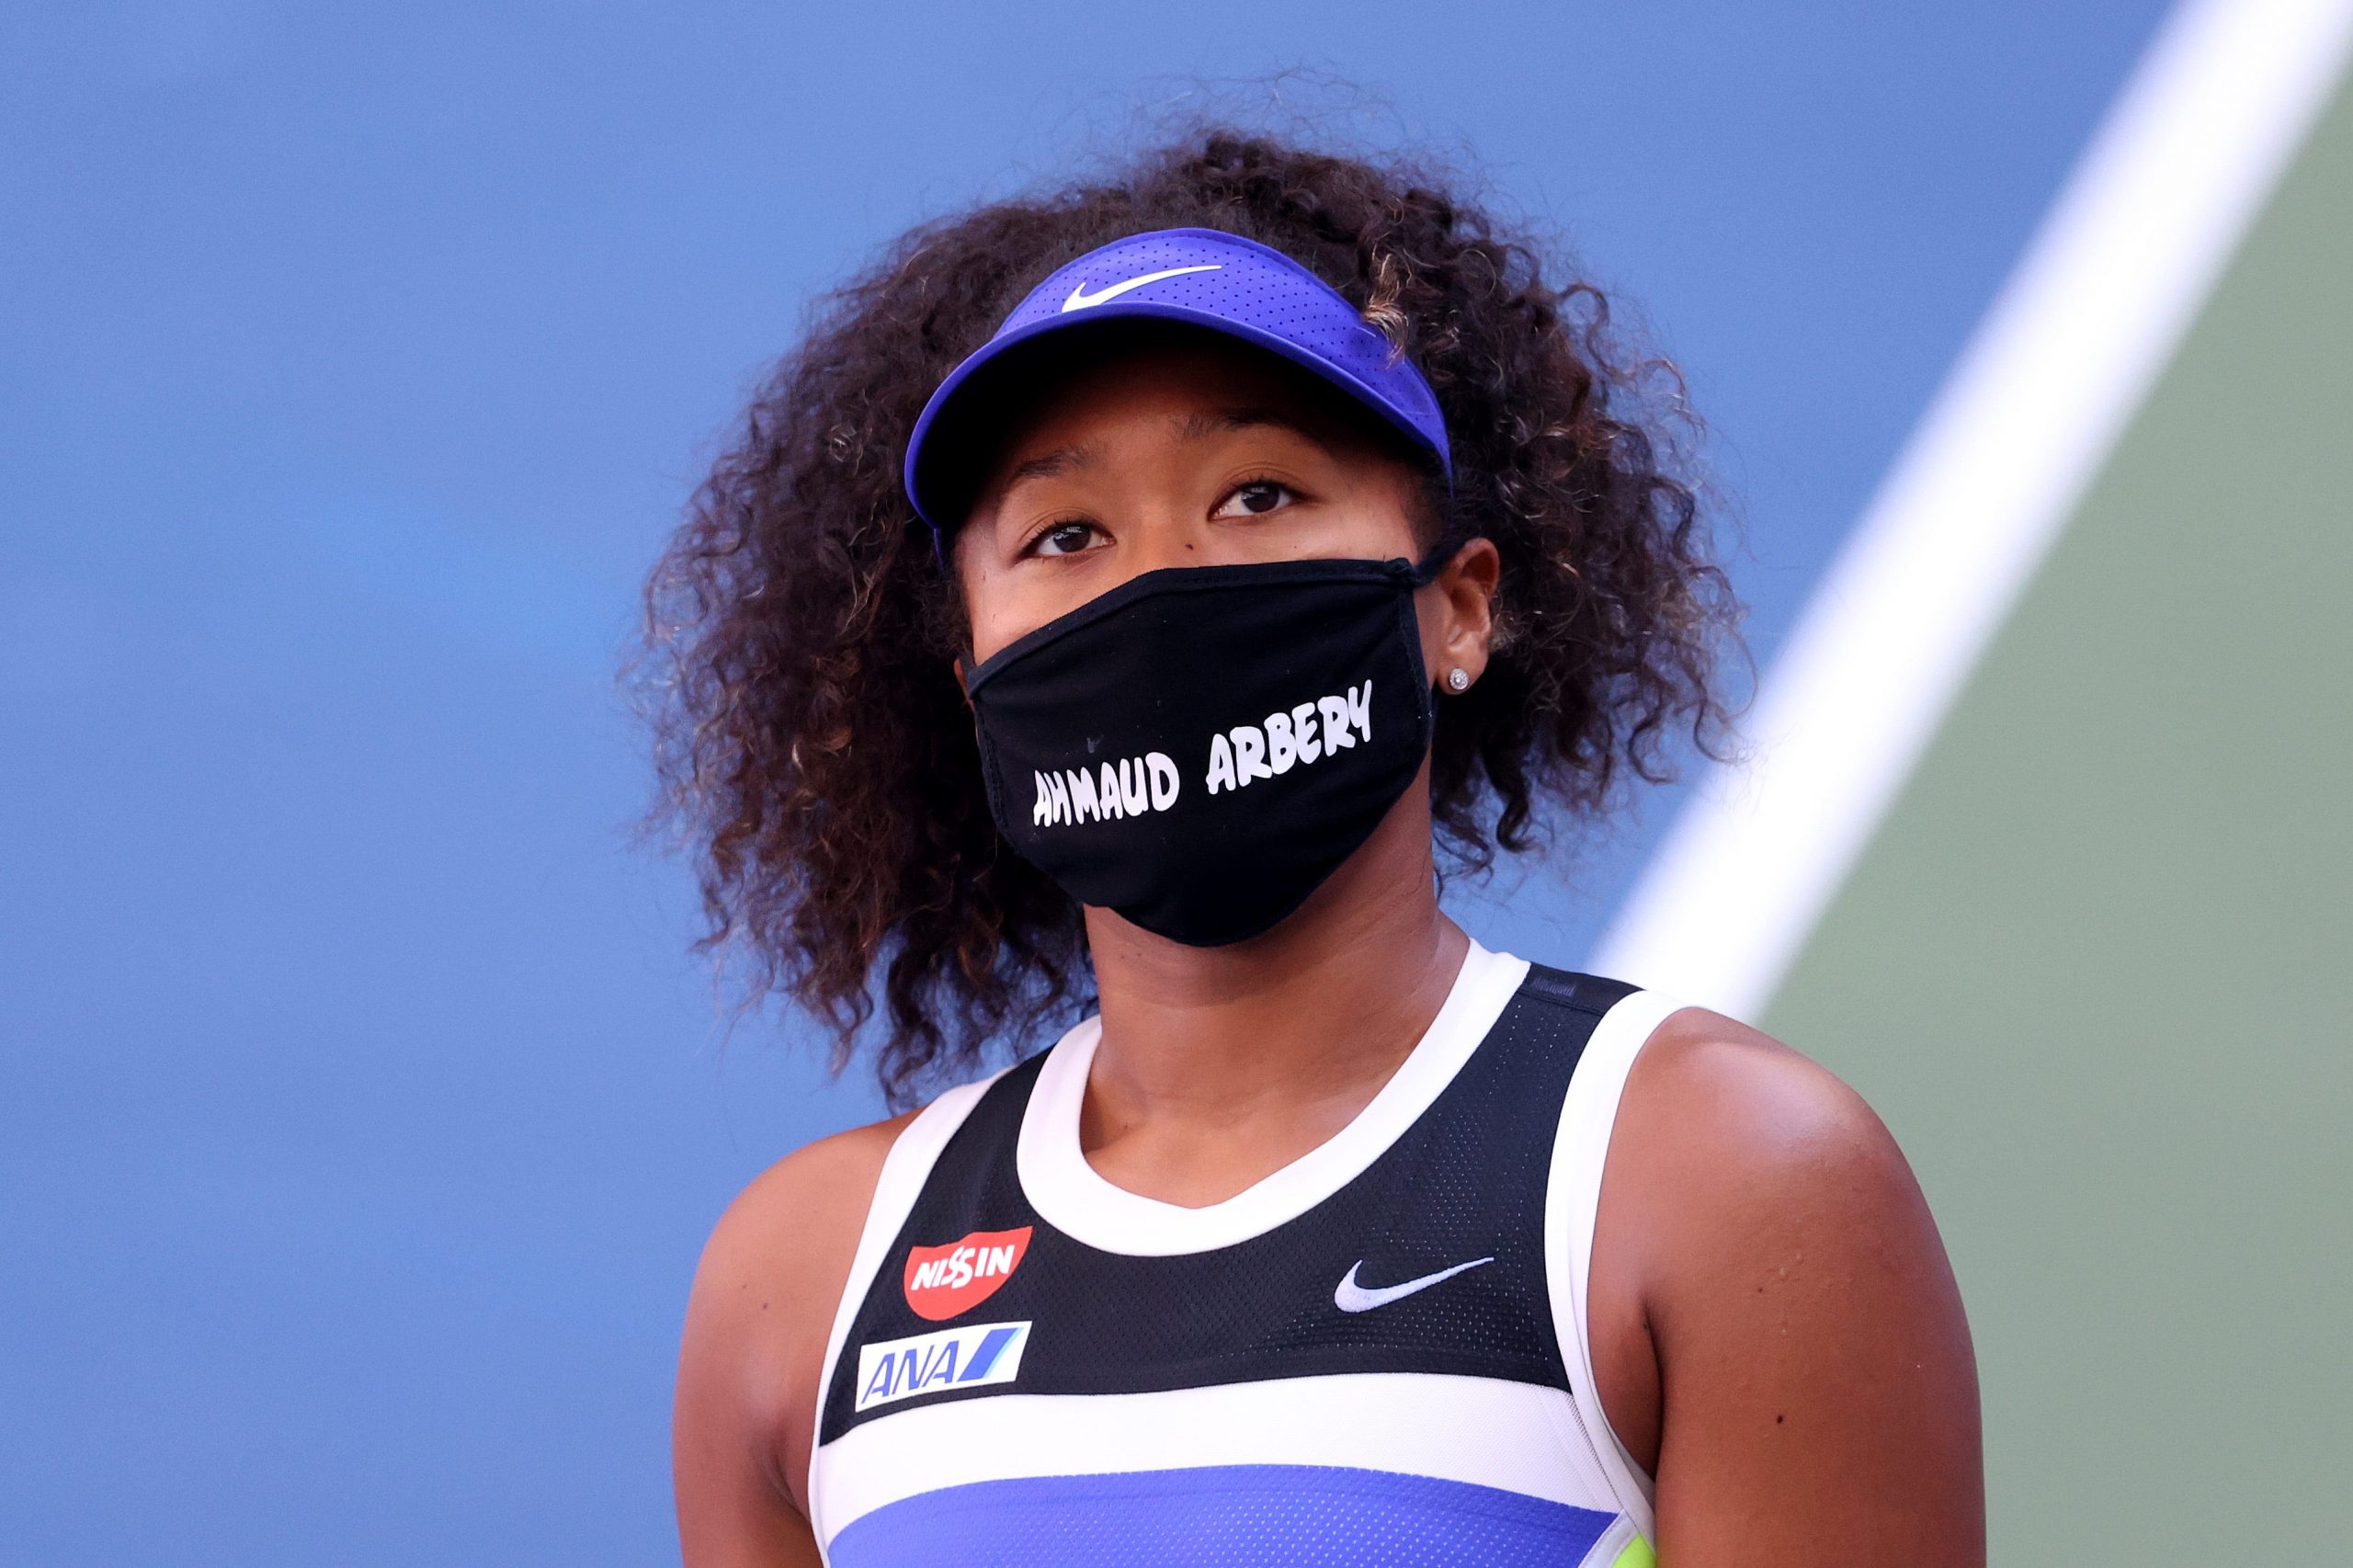 Naomi Osaka wearing a mask with Ahmaud Arbery's name at the 2020 US Open